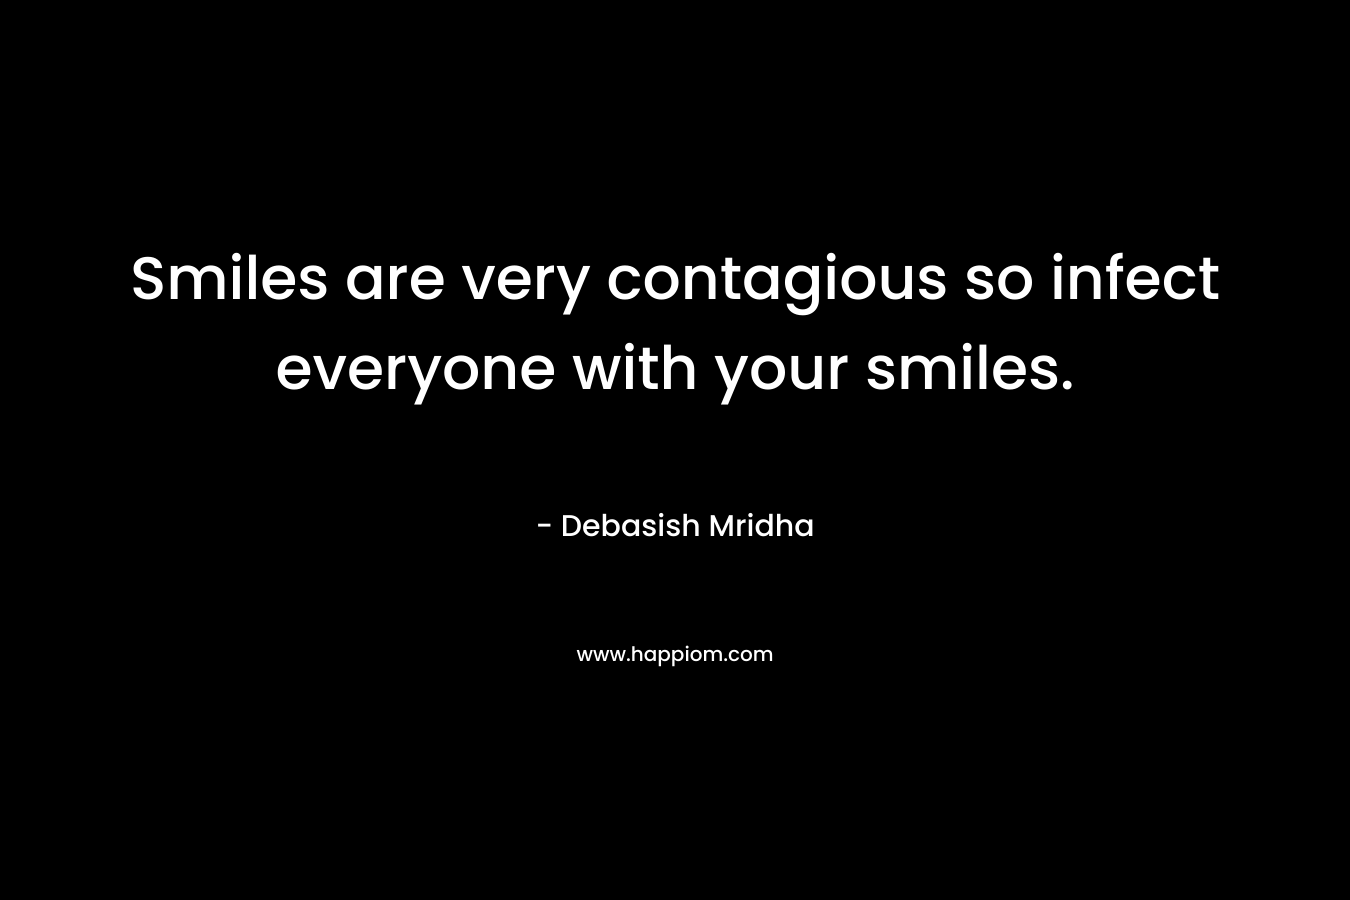 Smiles are very contagious so infect everyone with your smiles.